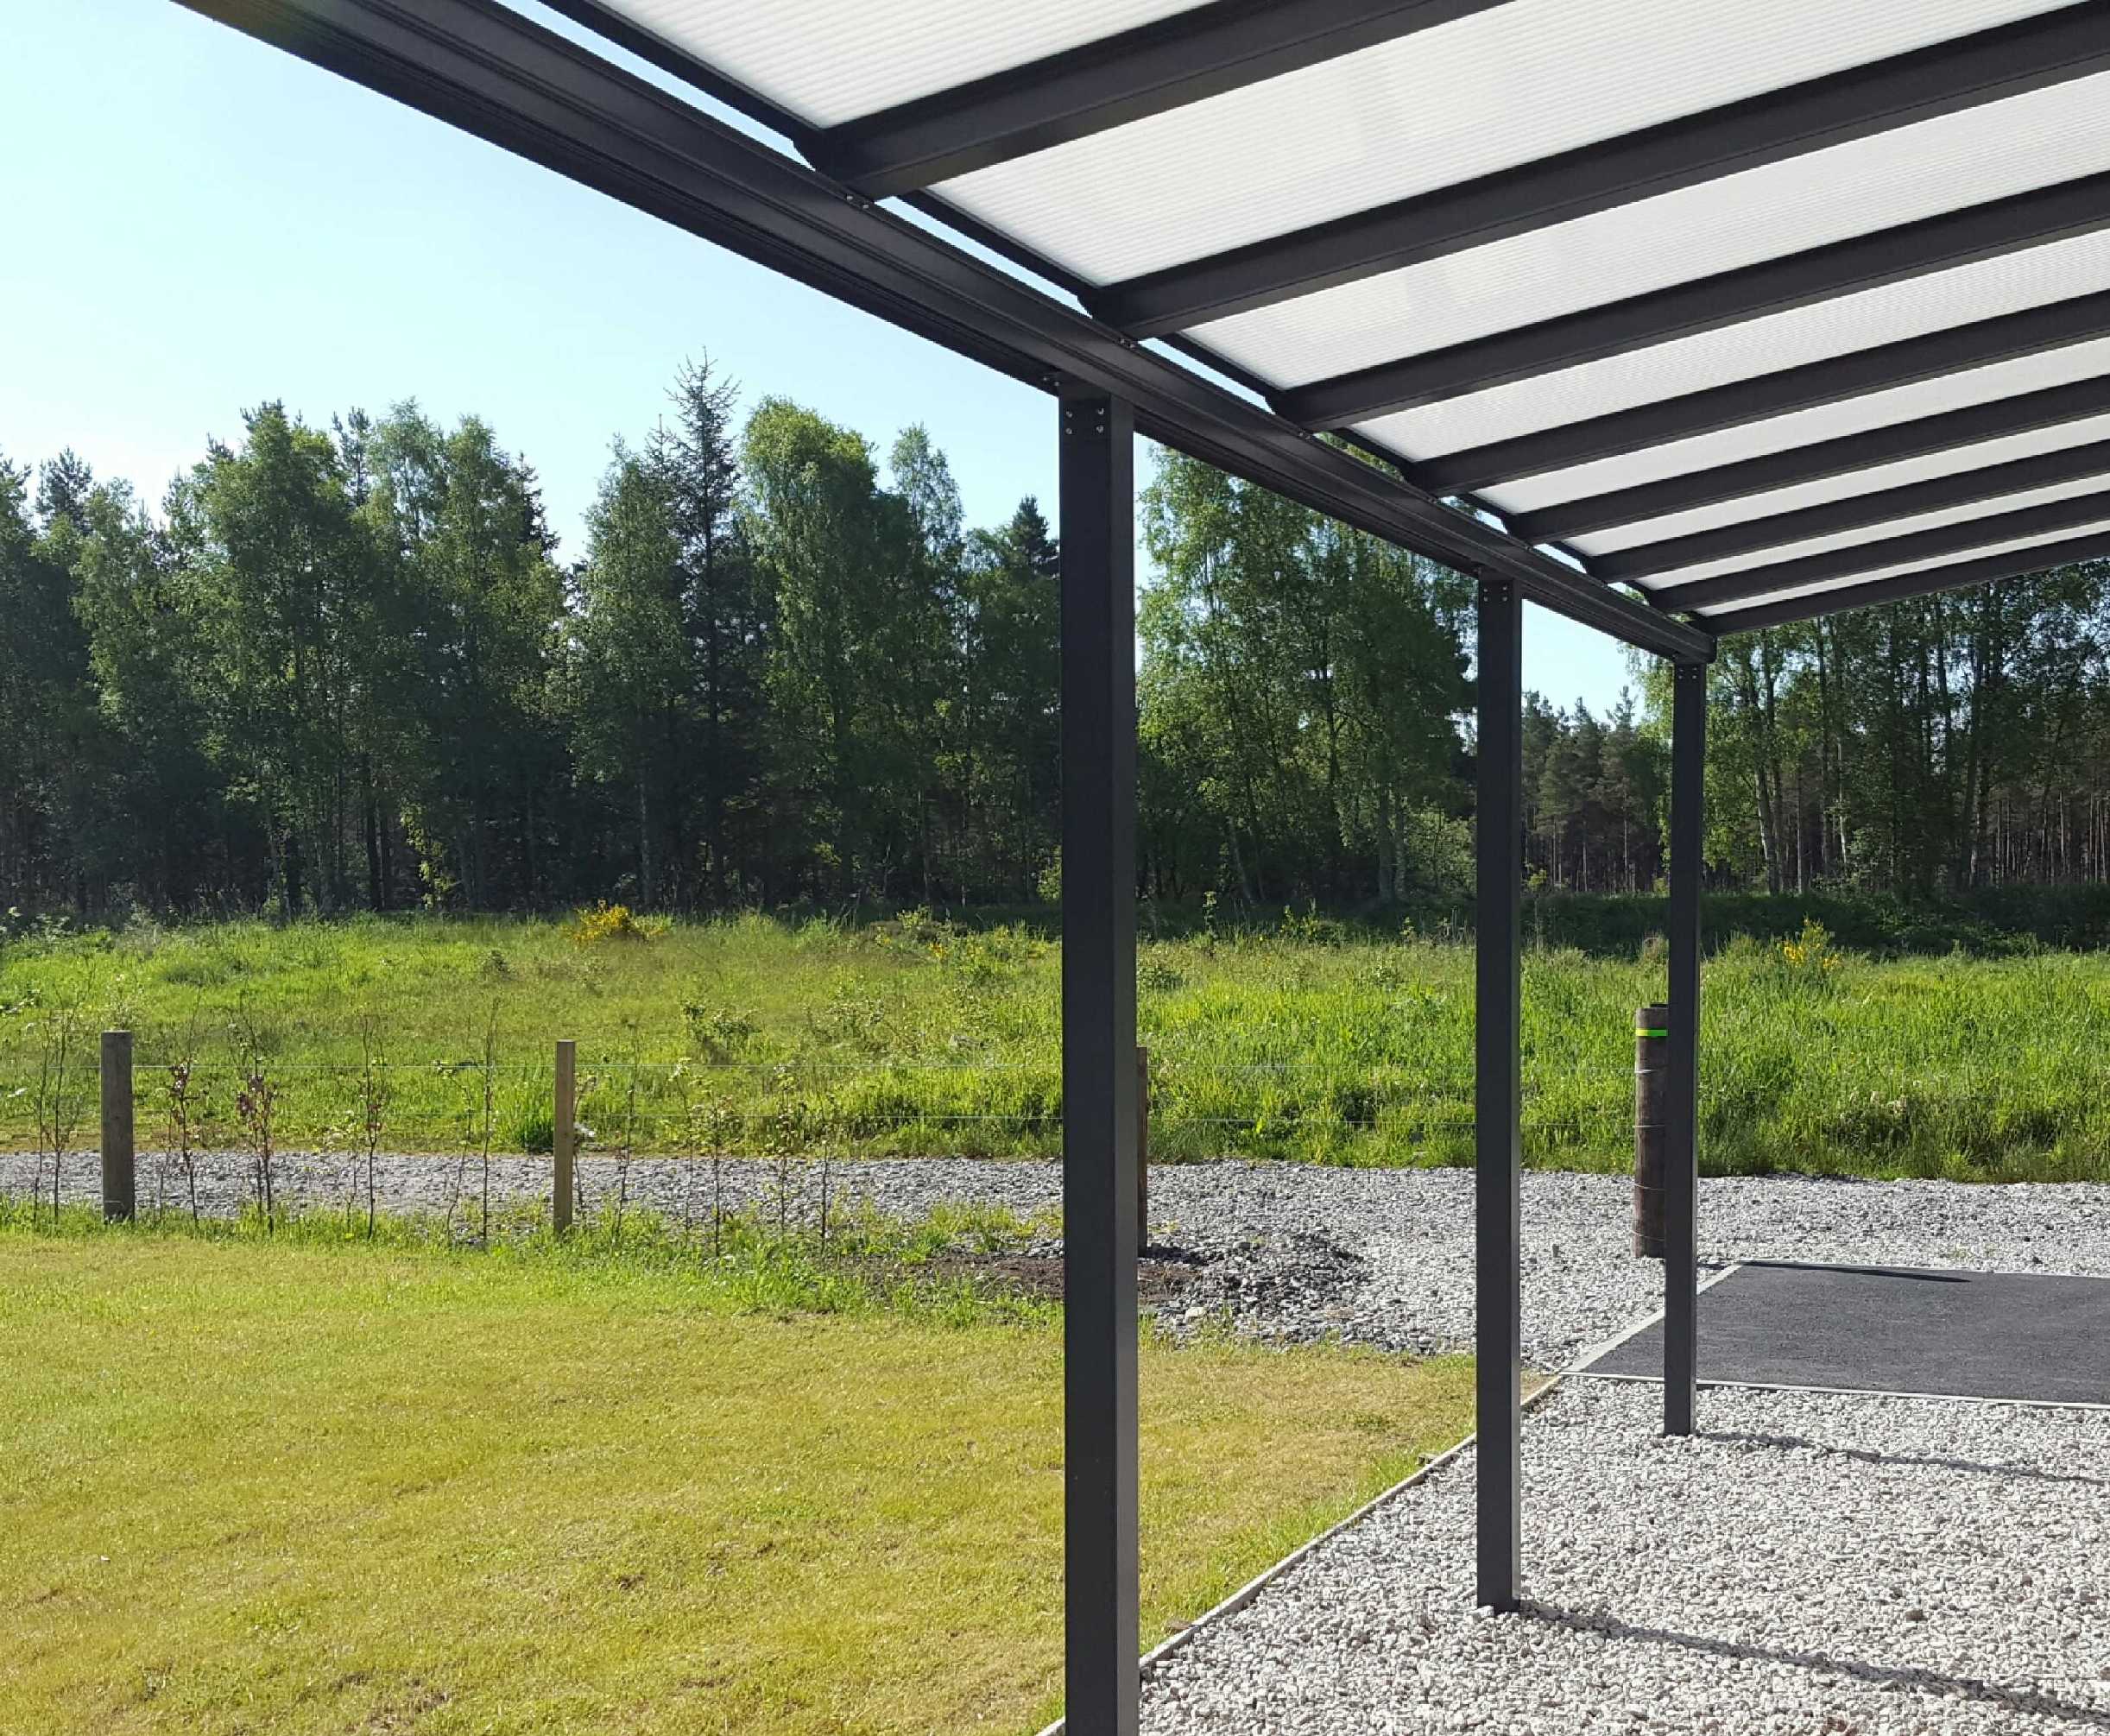 Omega Smart Lean-To Canopy, Anthracite Grey, 6mm Glass Clear Plate Polycarbonate Glazing - 4.9m (W) x 1.5m (P), (3) Supporting Posts